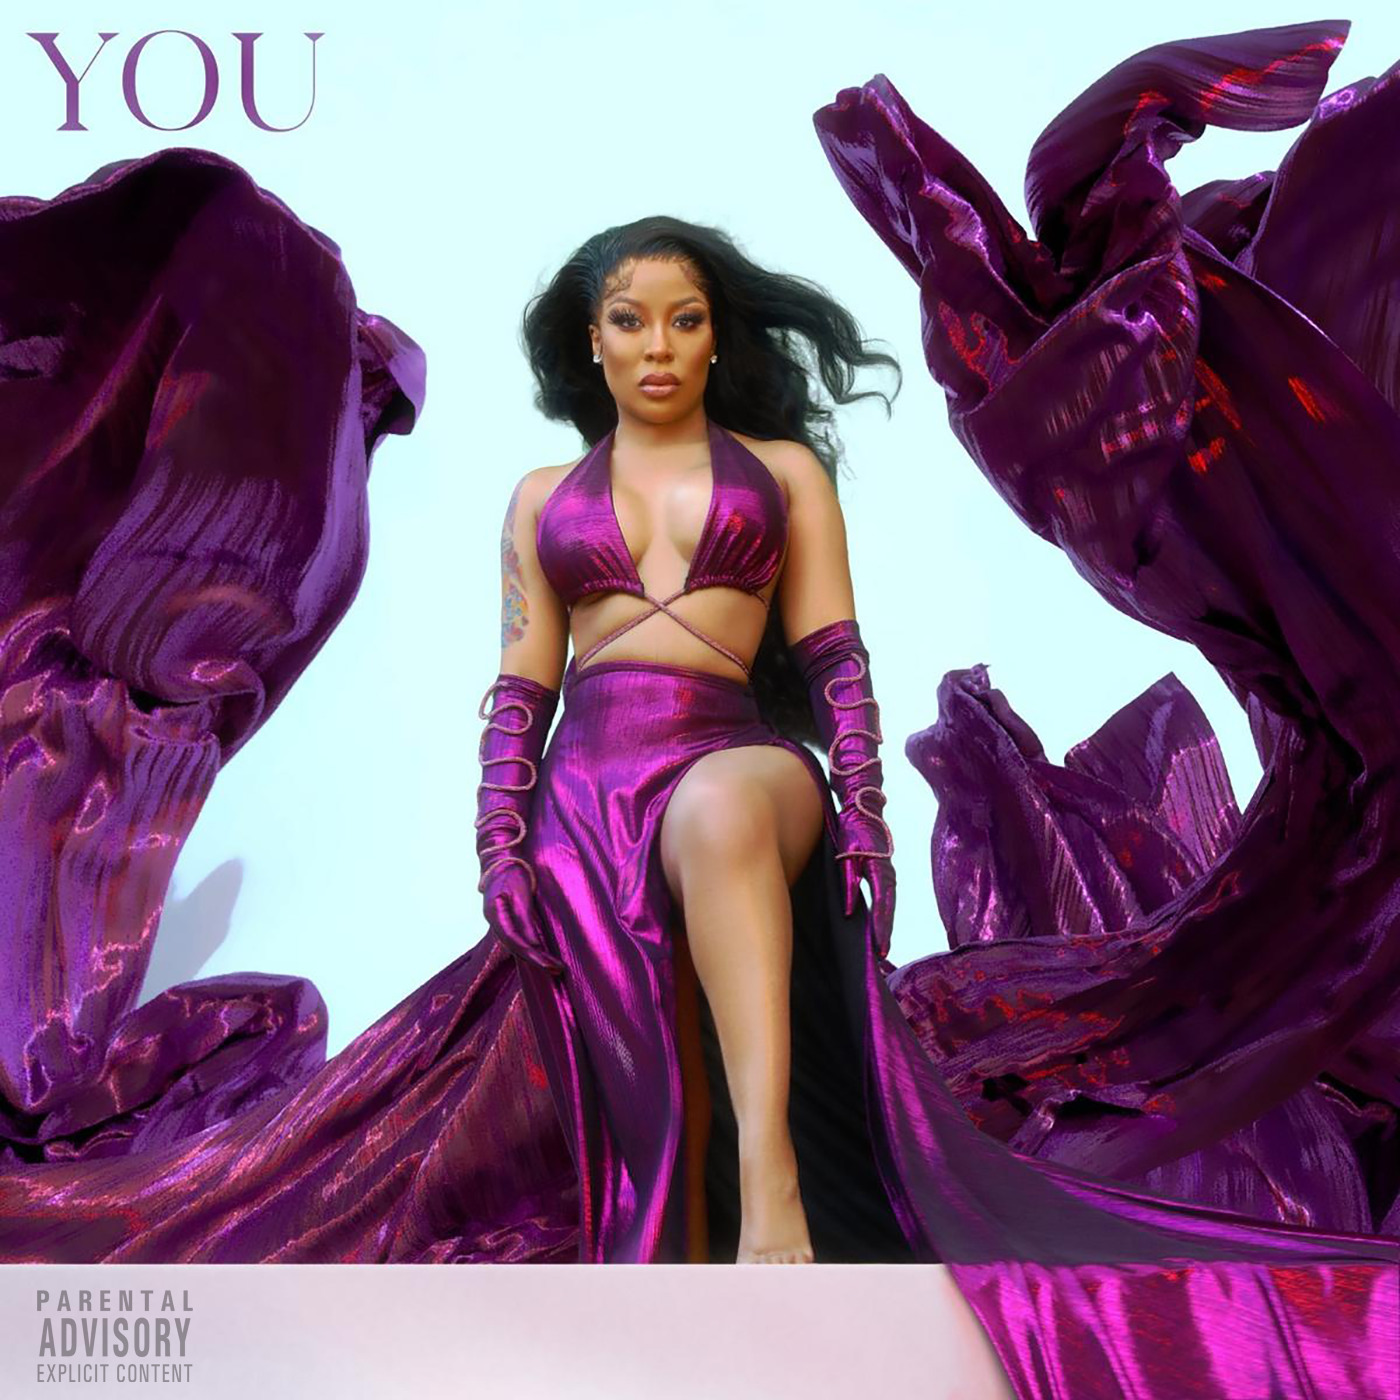 K. Michelle “YOU” (Video)